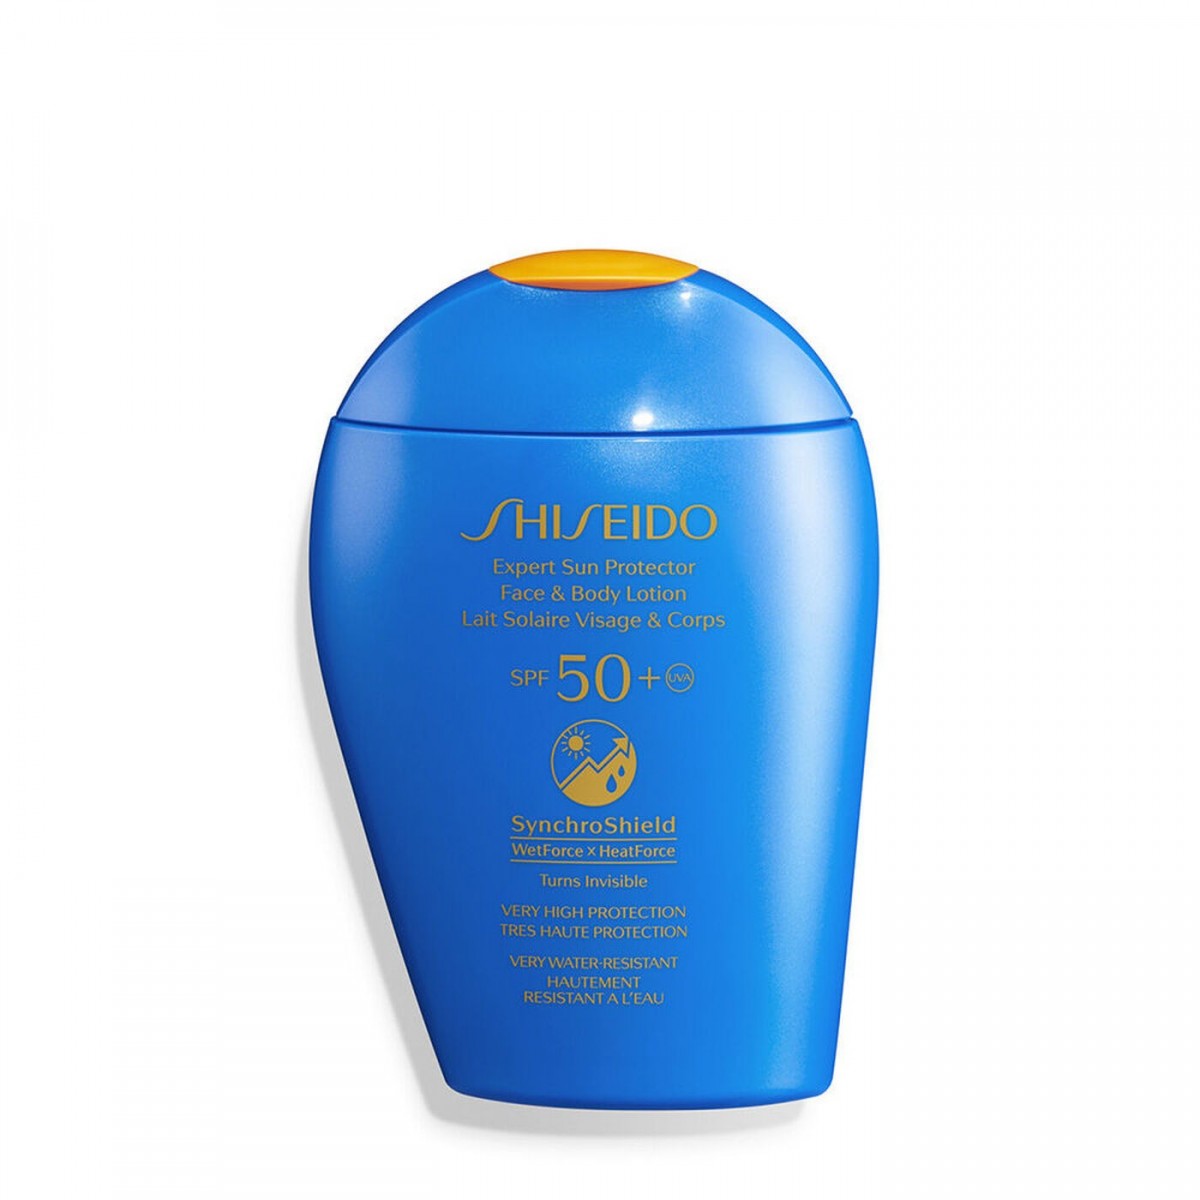 Expert Sun Protector Face and body lotion SPF50+